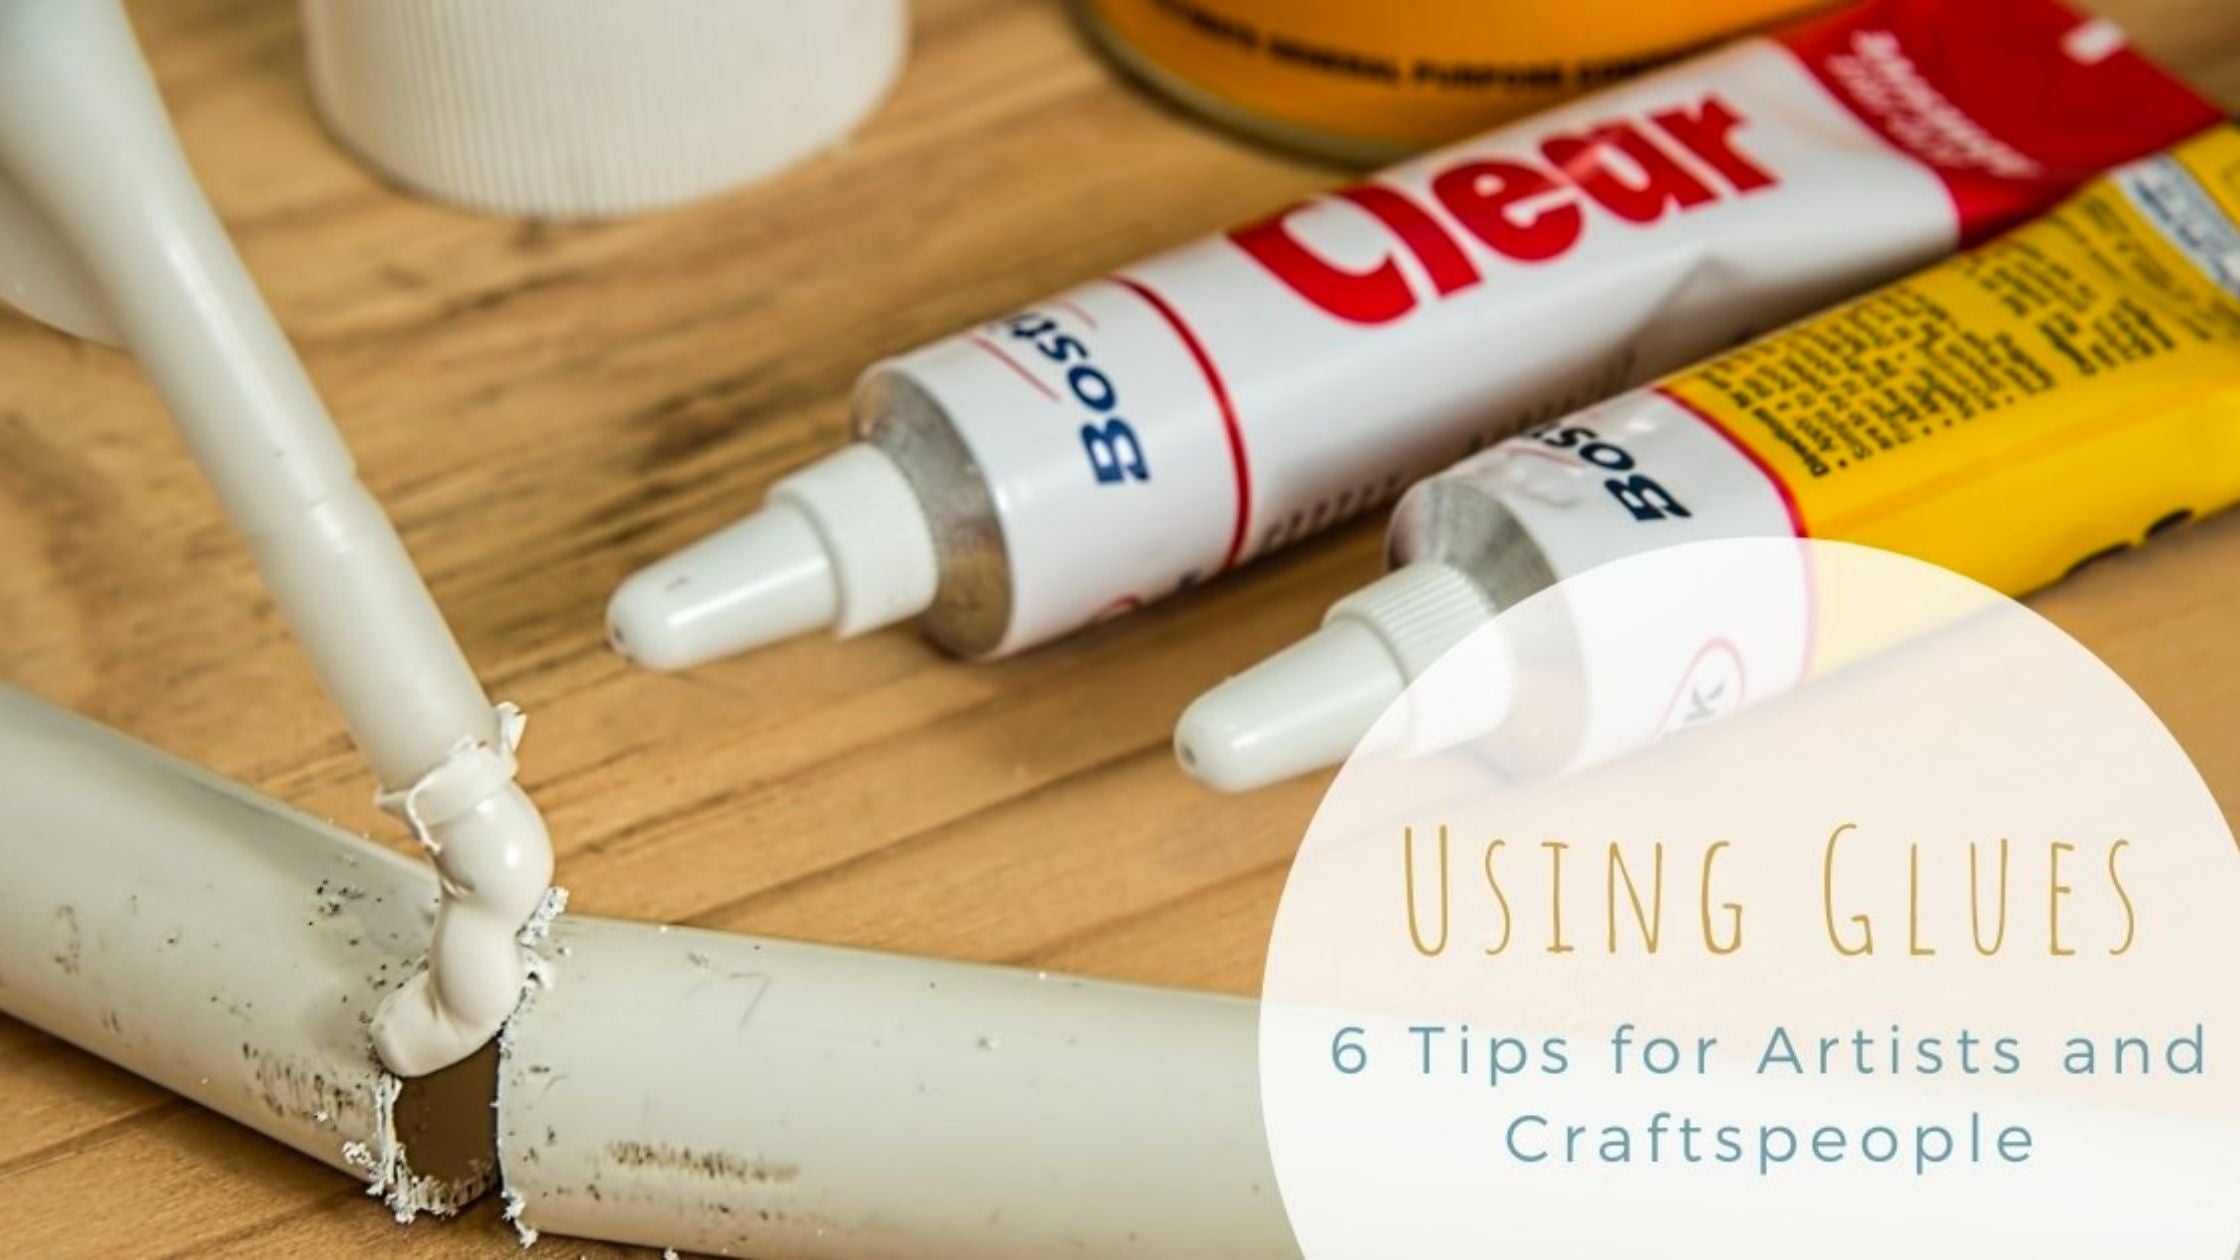 Using Glues: 6 Tips for Artists and Craftspeople